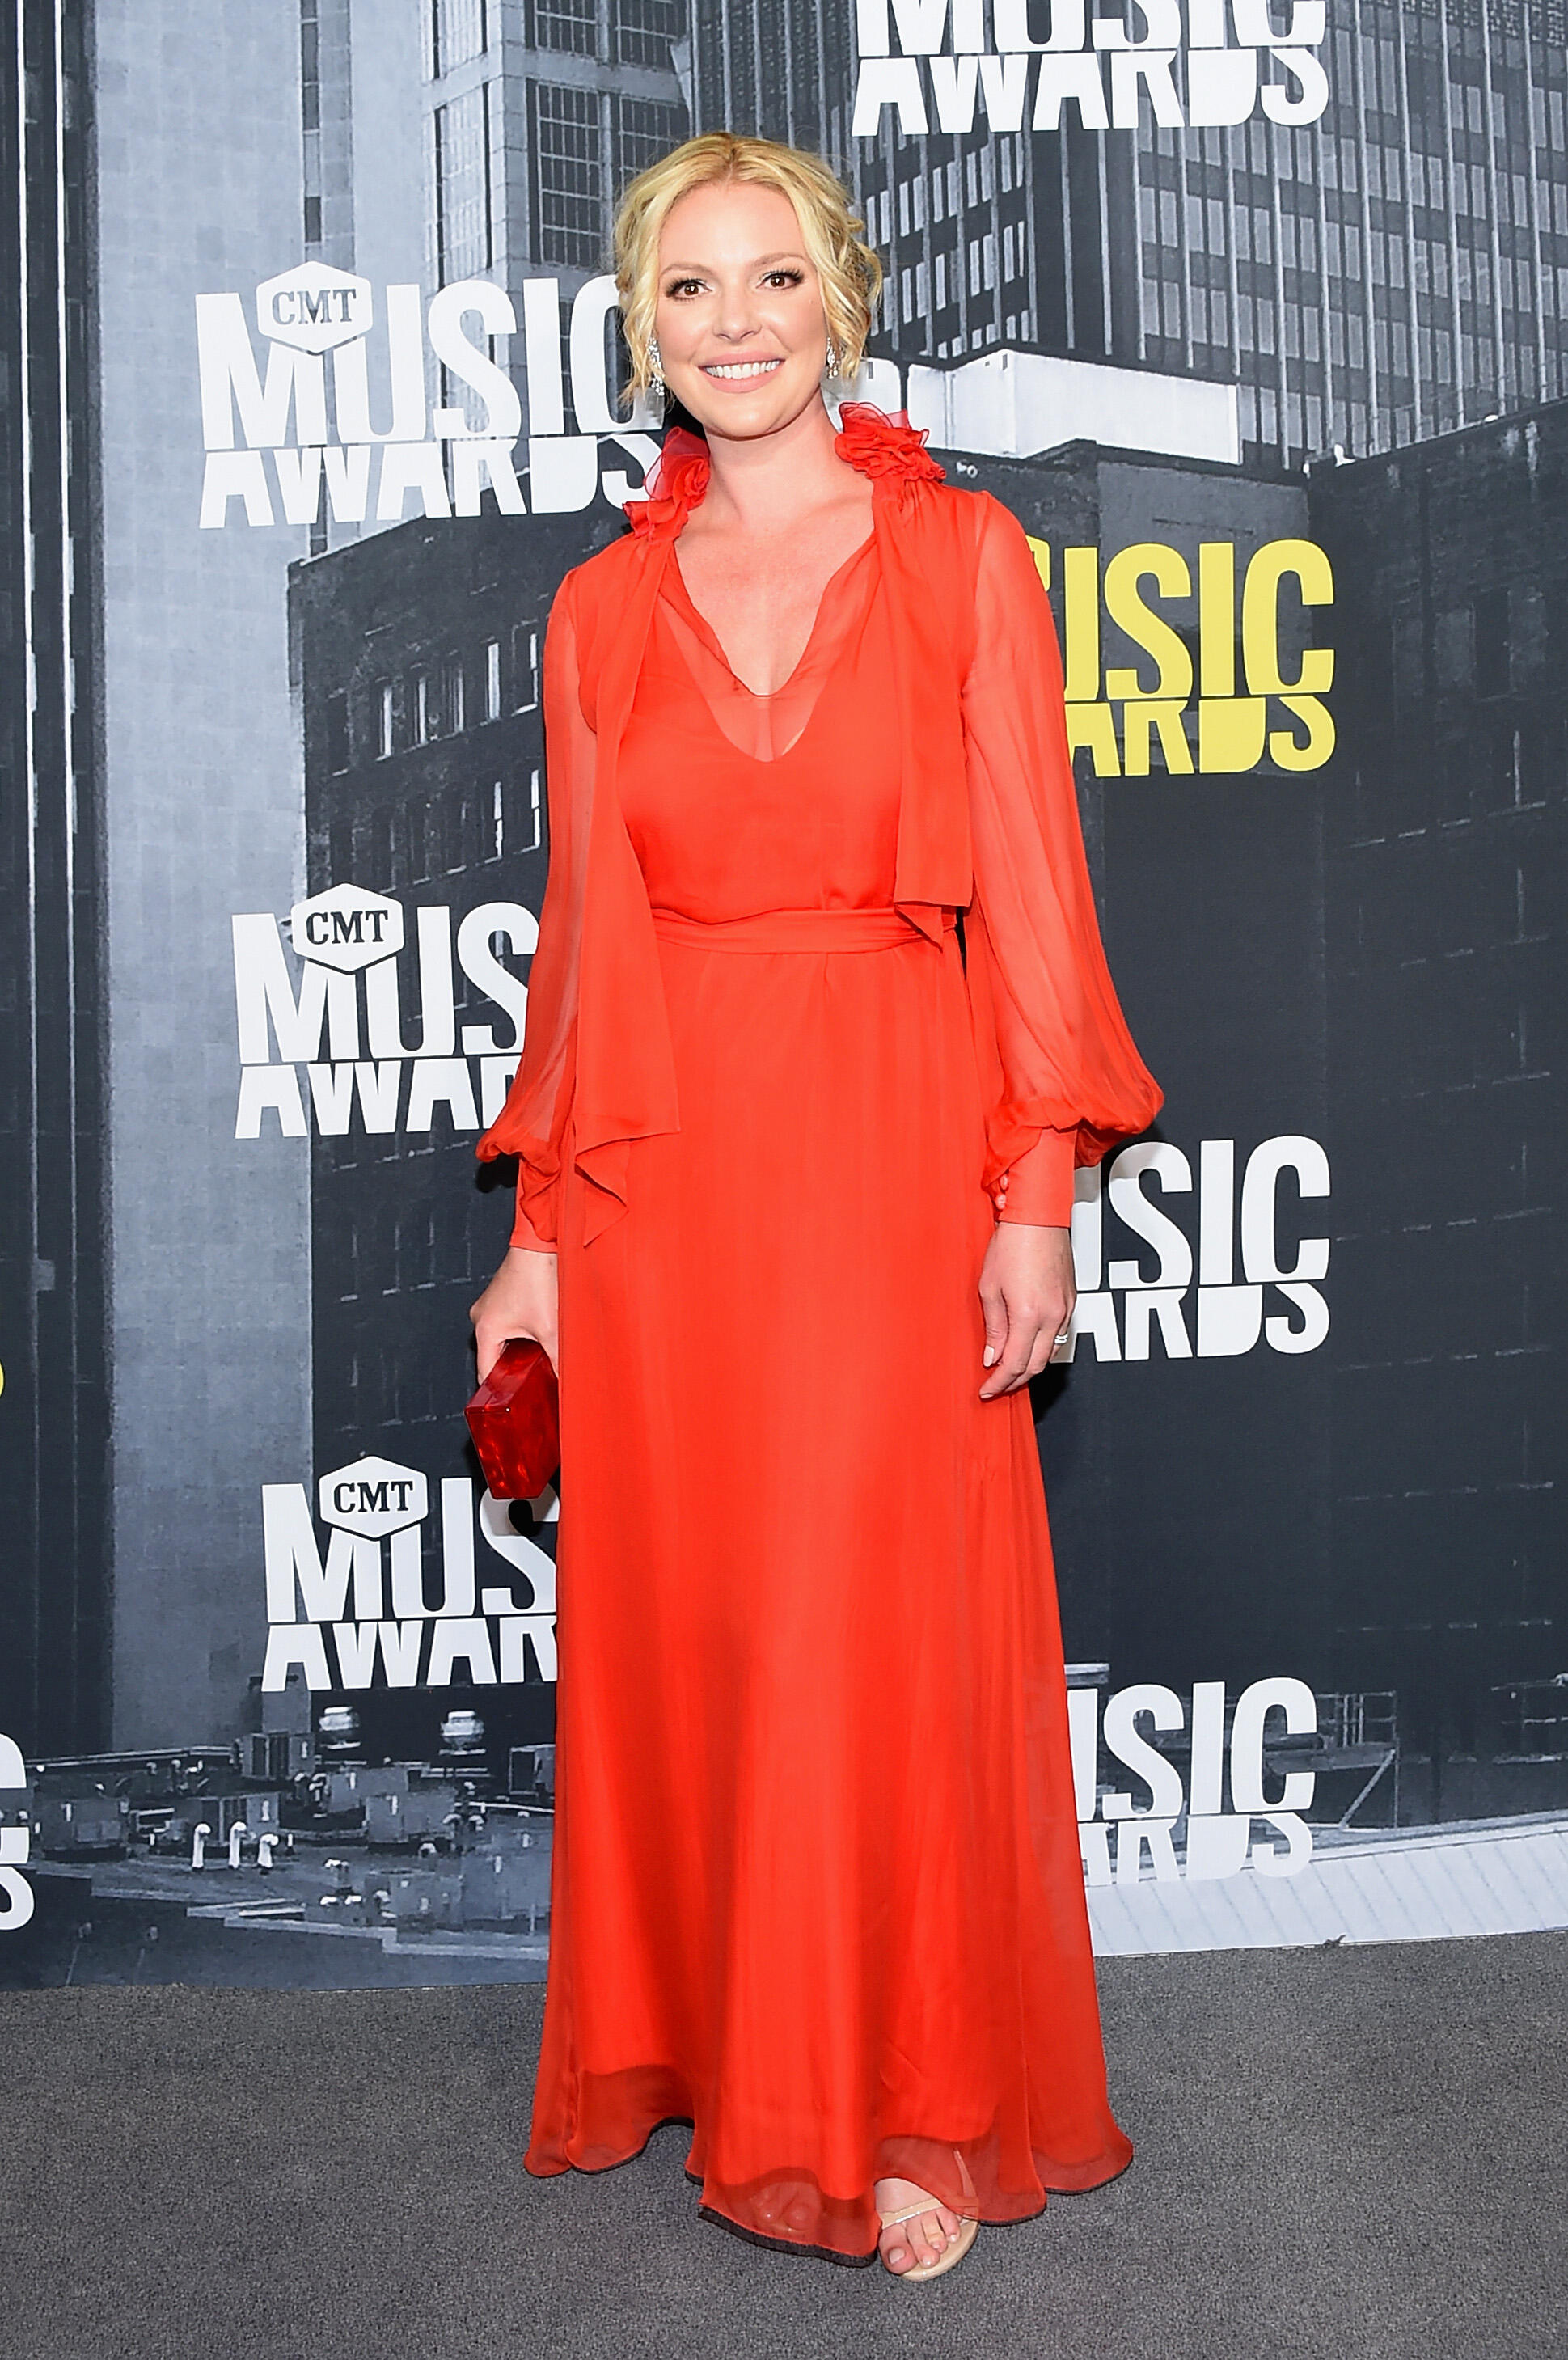 NASHVILLE, TN - JUNE 07:  Actress Katherine Heigl attends the 2017 CMT Music Awards at the Music City Center on June 7, 2017 in Nashville, Tennessee.  (Photo by Michael Loccisano/Getty Images For CMT)